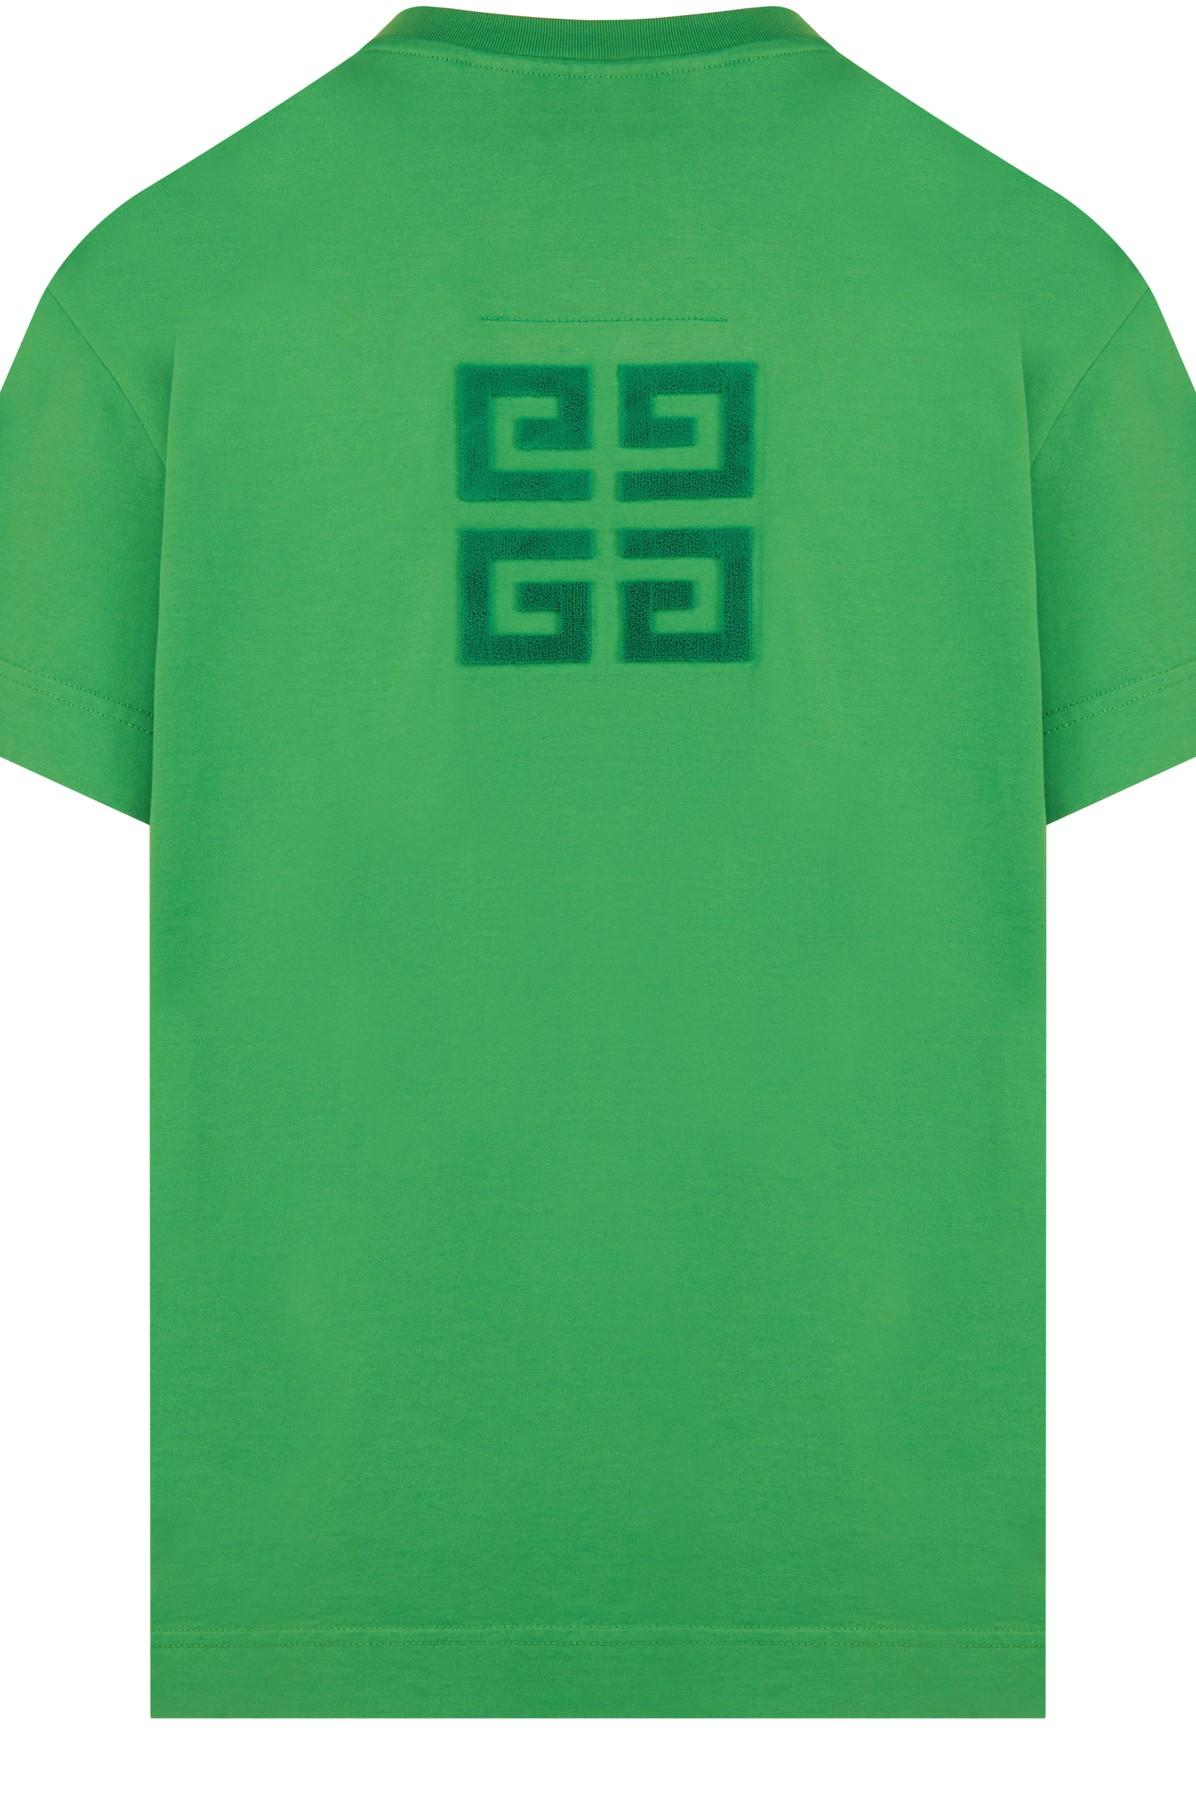 Givenchy T-shirt in Green | Lyst